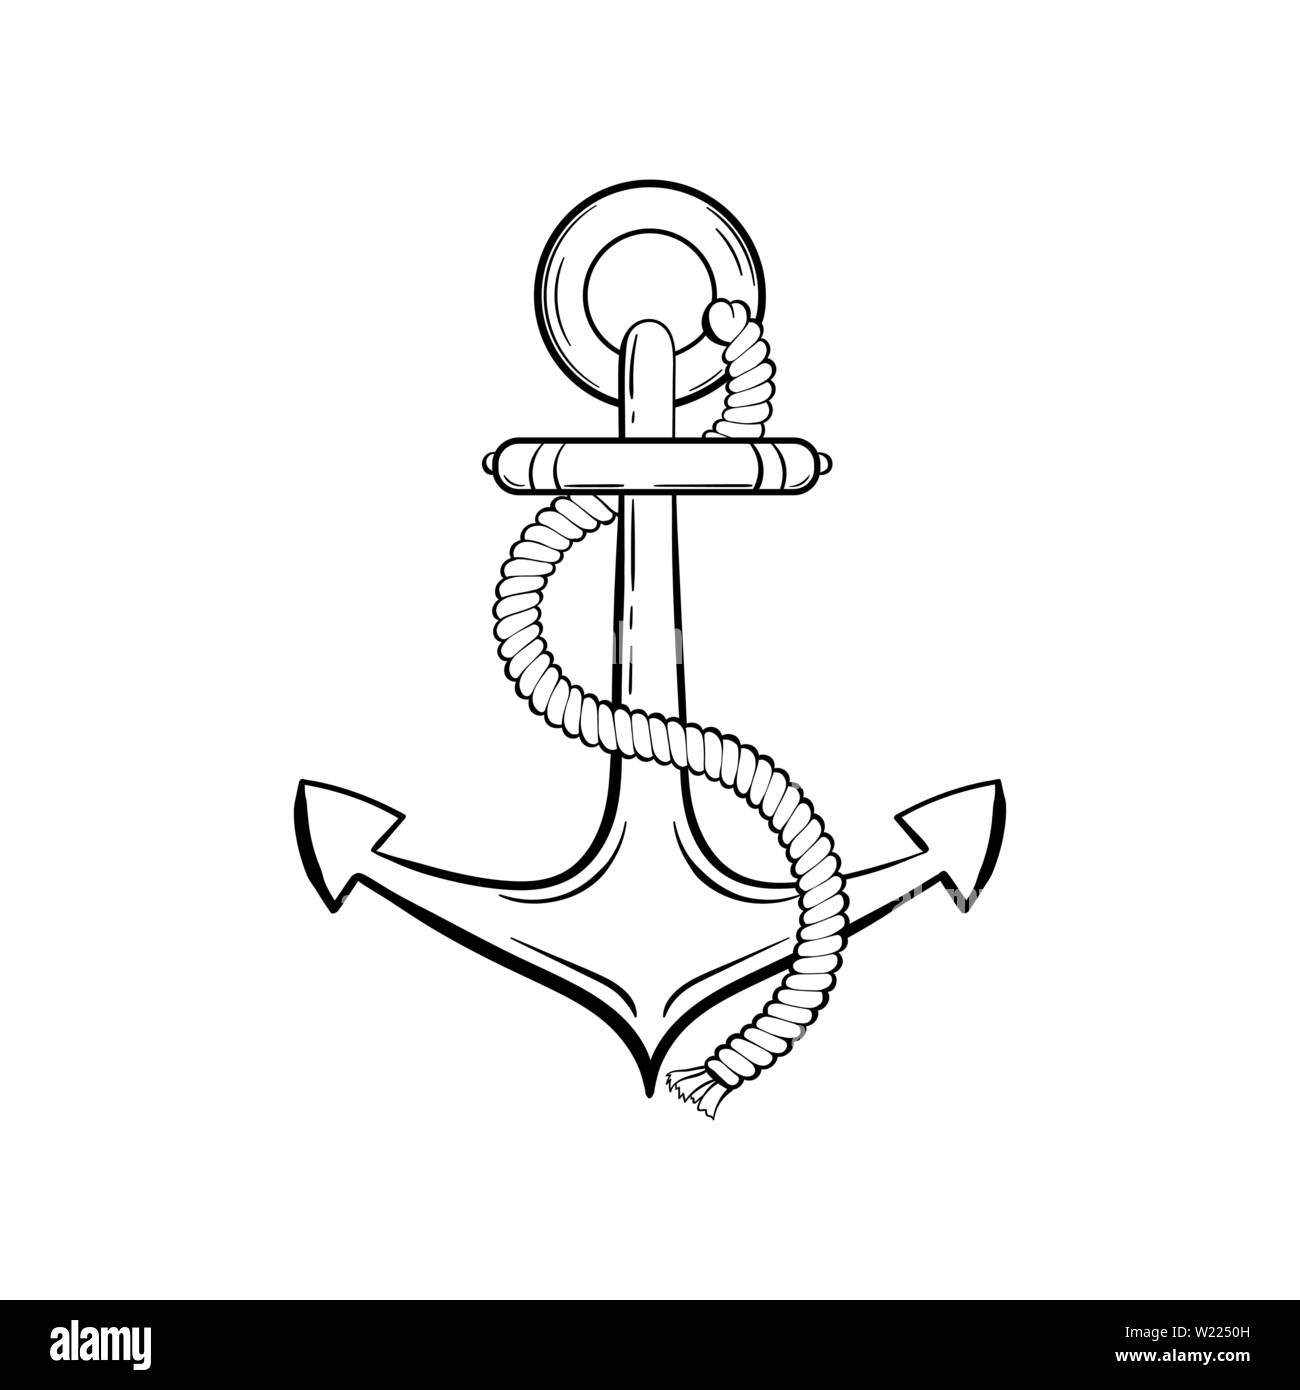 Anchor with rope black ink vector illustration. Sea boat, yacht, ship safety equipment sketch. Ancient anchor vintage engraving. Marine adventure symbol. Sailing club logo, poster design element Stock Vector